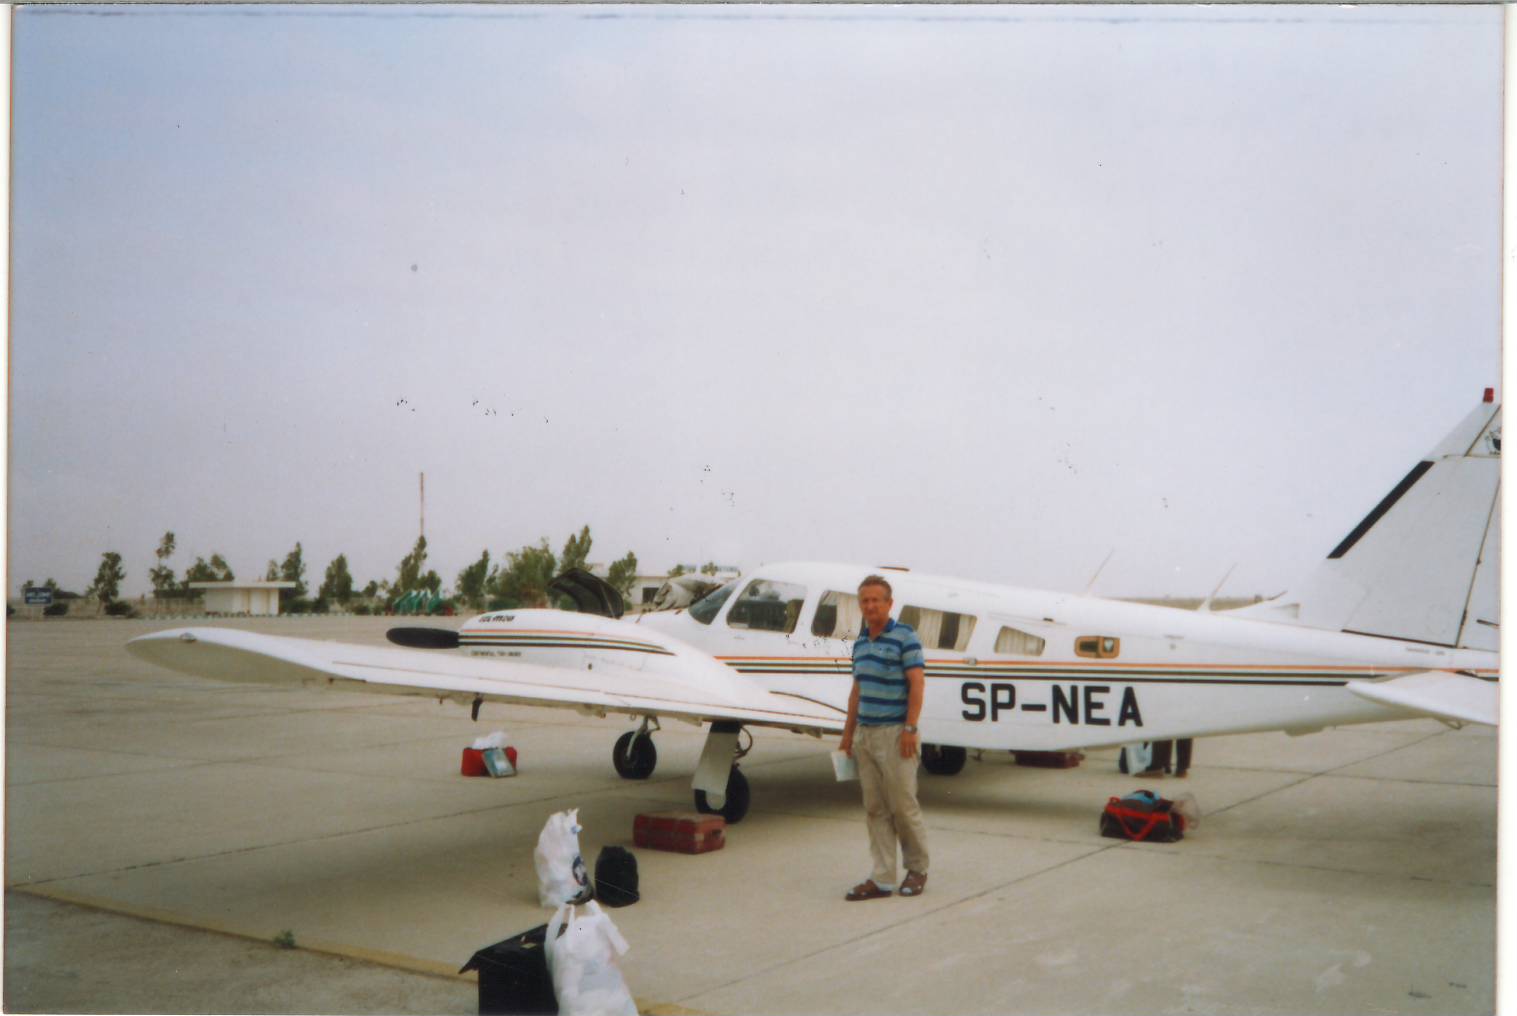 PZL M-20 Mewa- flight from Poland to India in 1989.